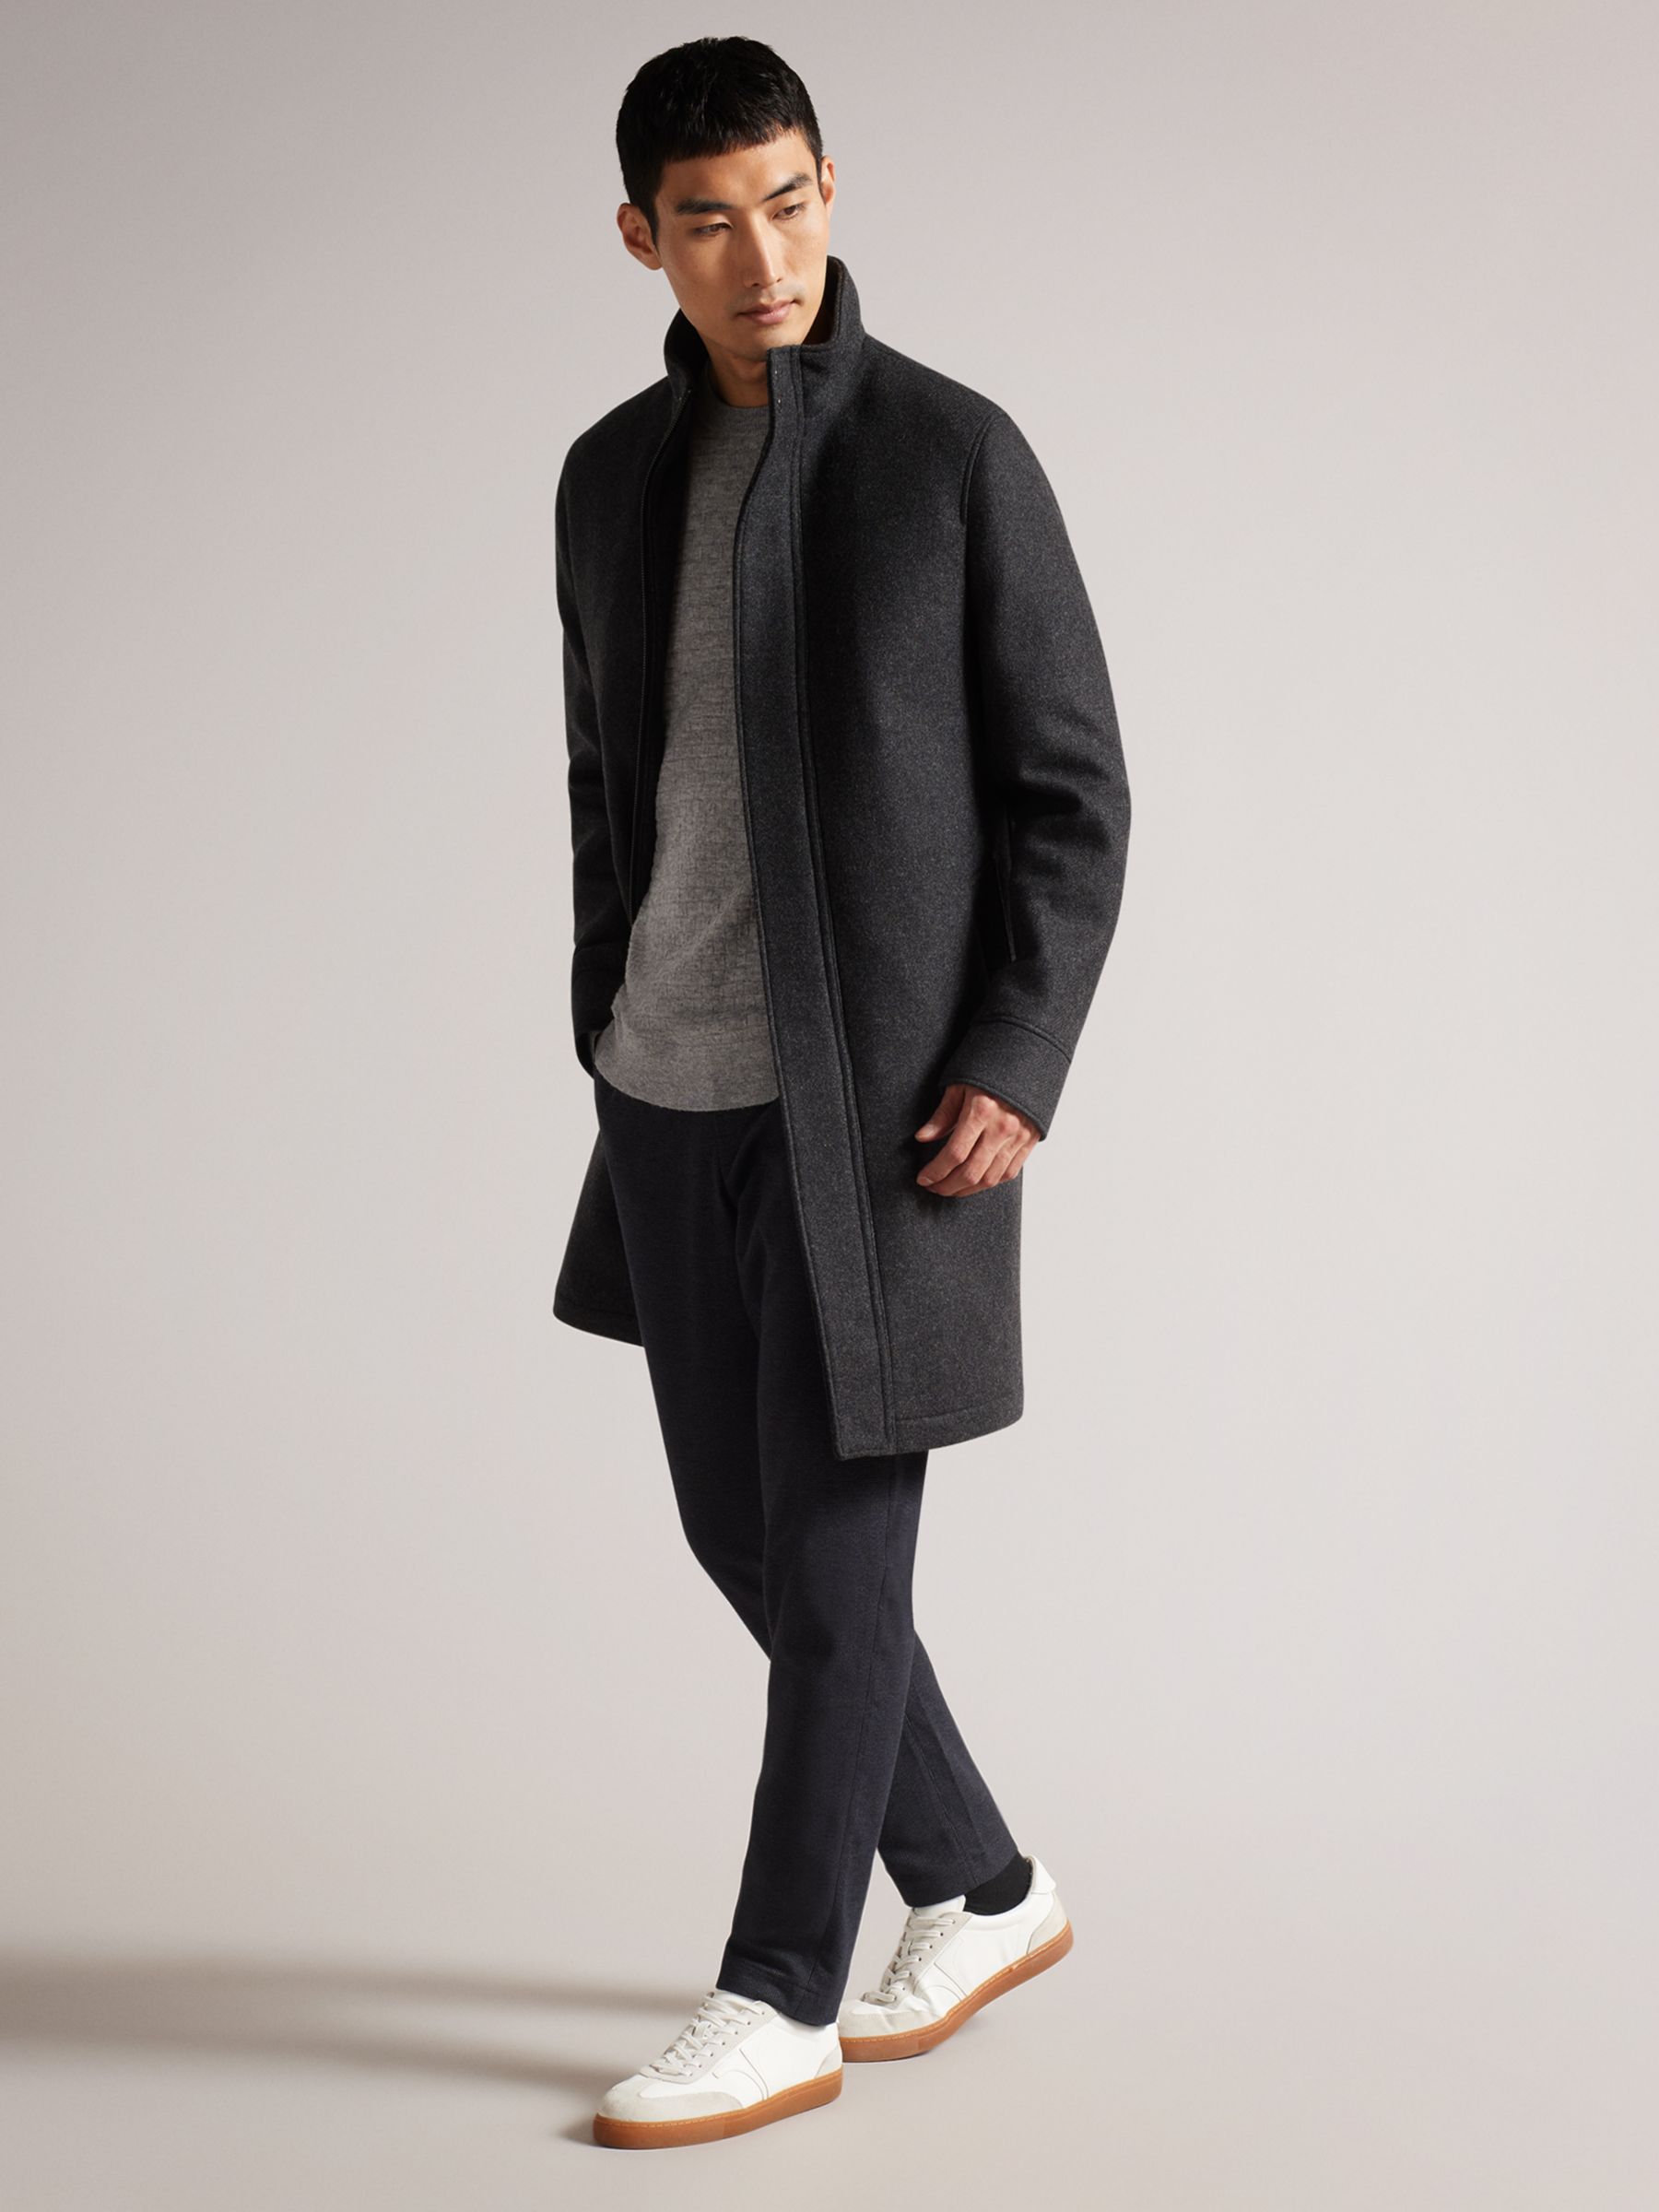 Ted Baker Icomb Wool Blend Funnel Neck Coat, Grey at John Lewis & Partners